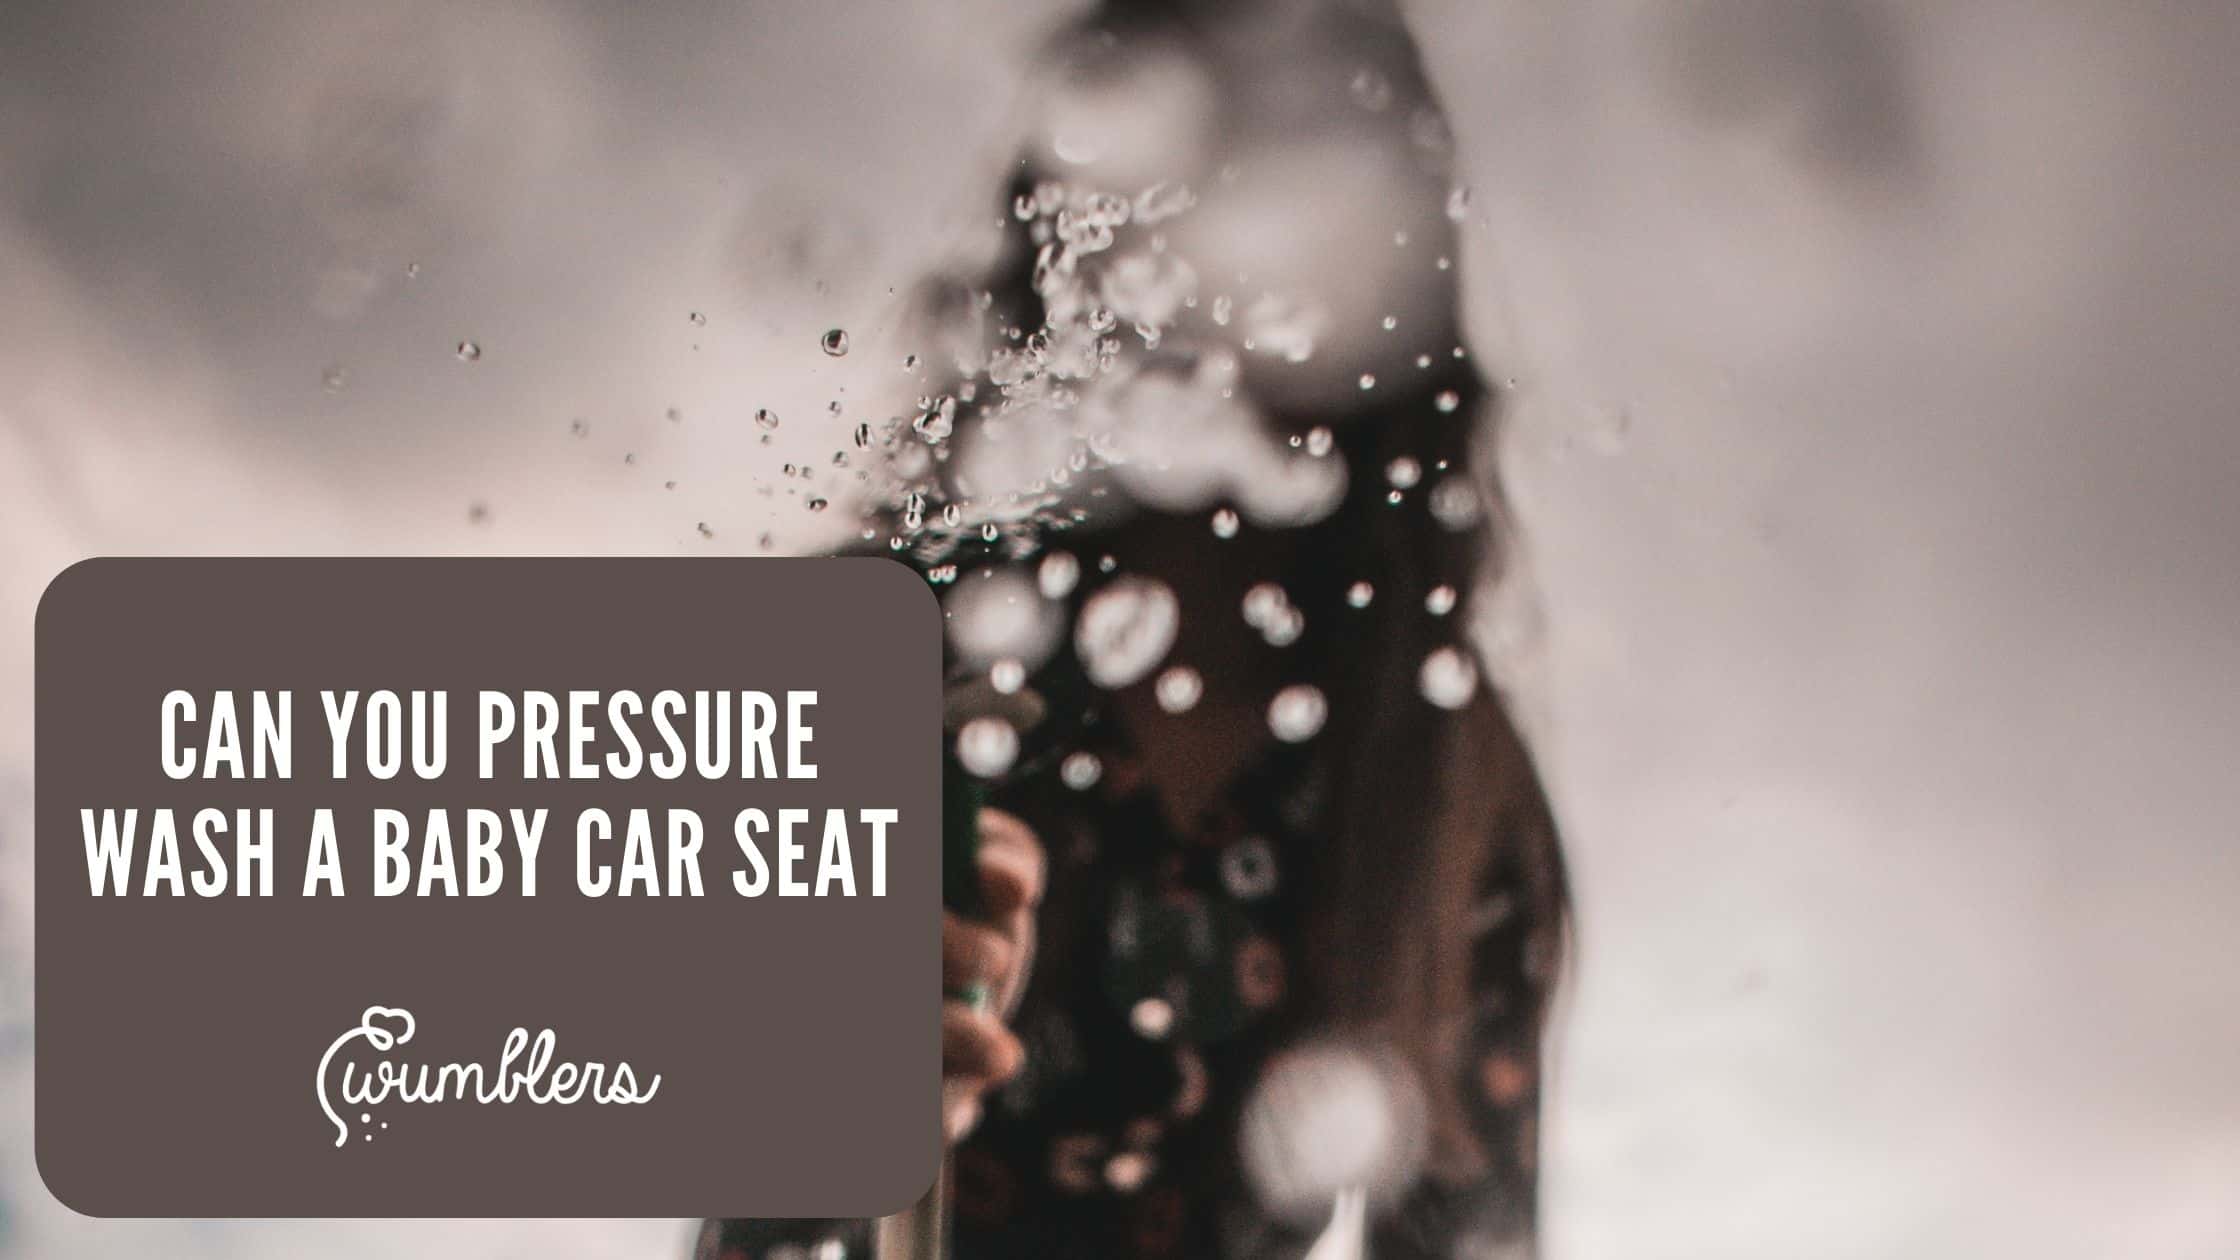 Can You Pressure Wash a Baby Car Seat